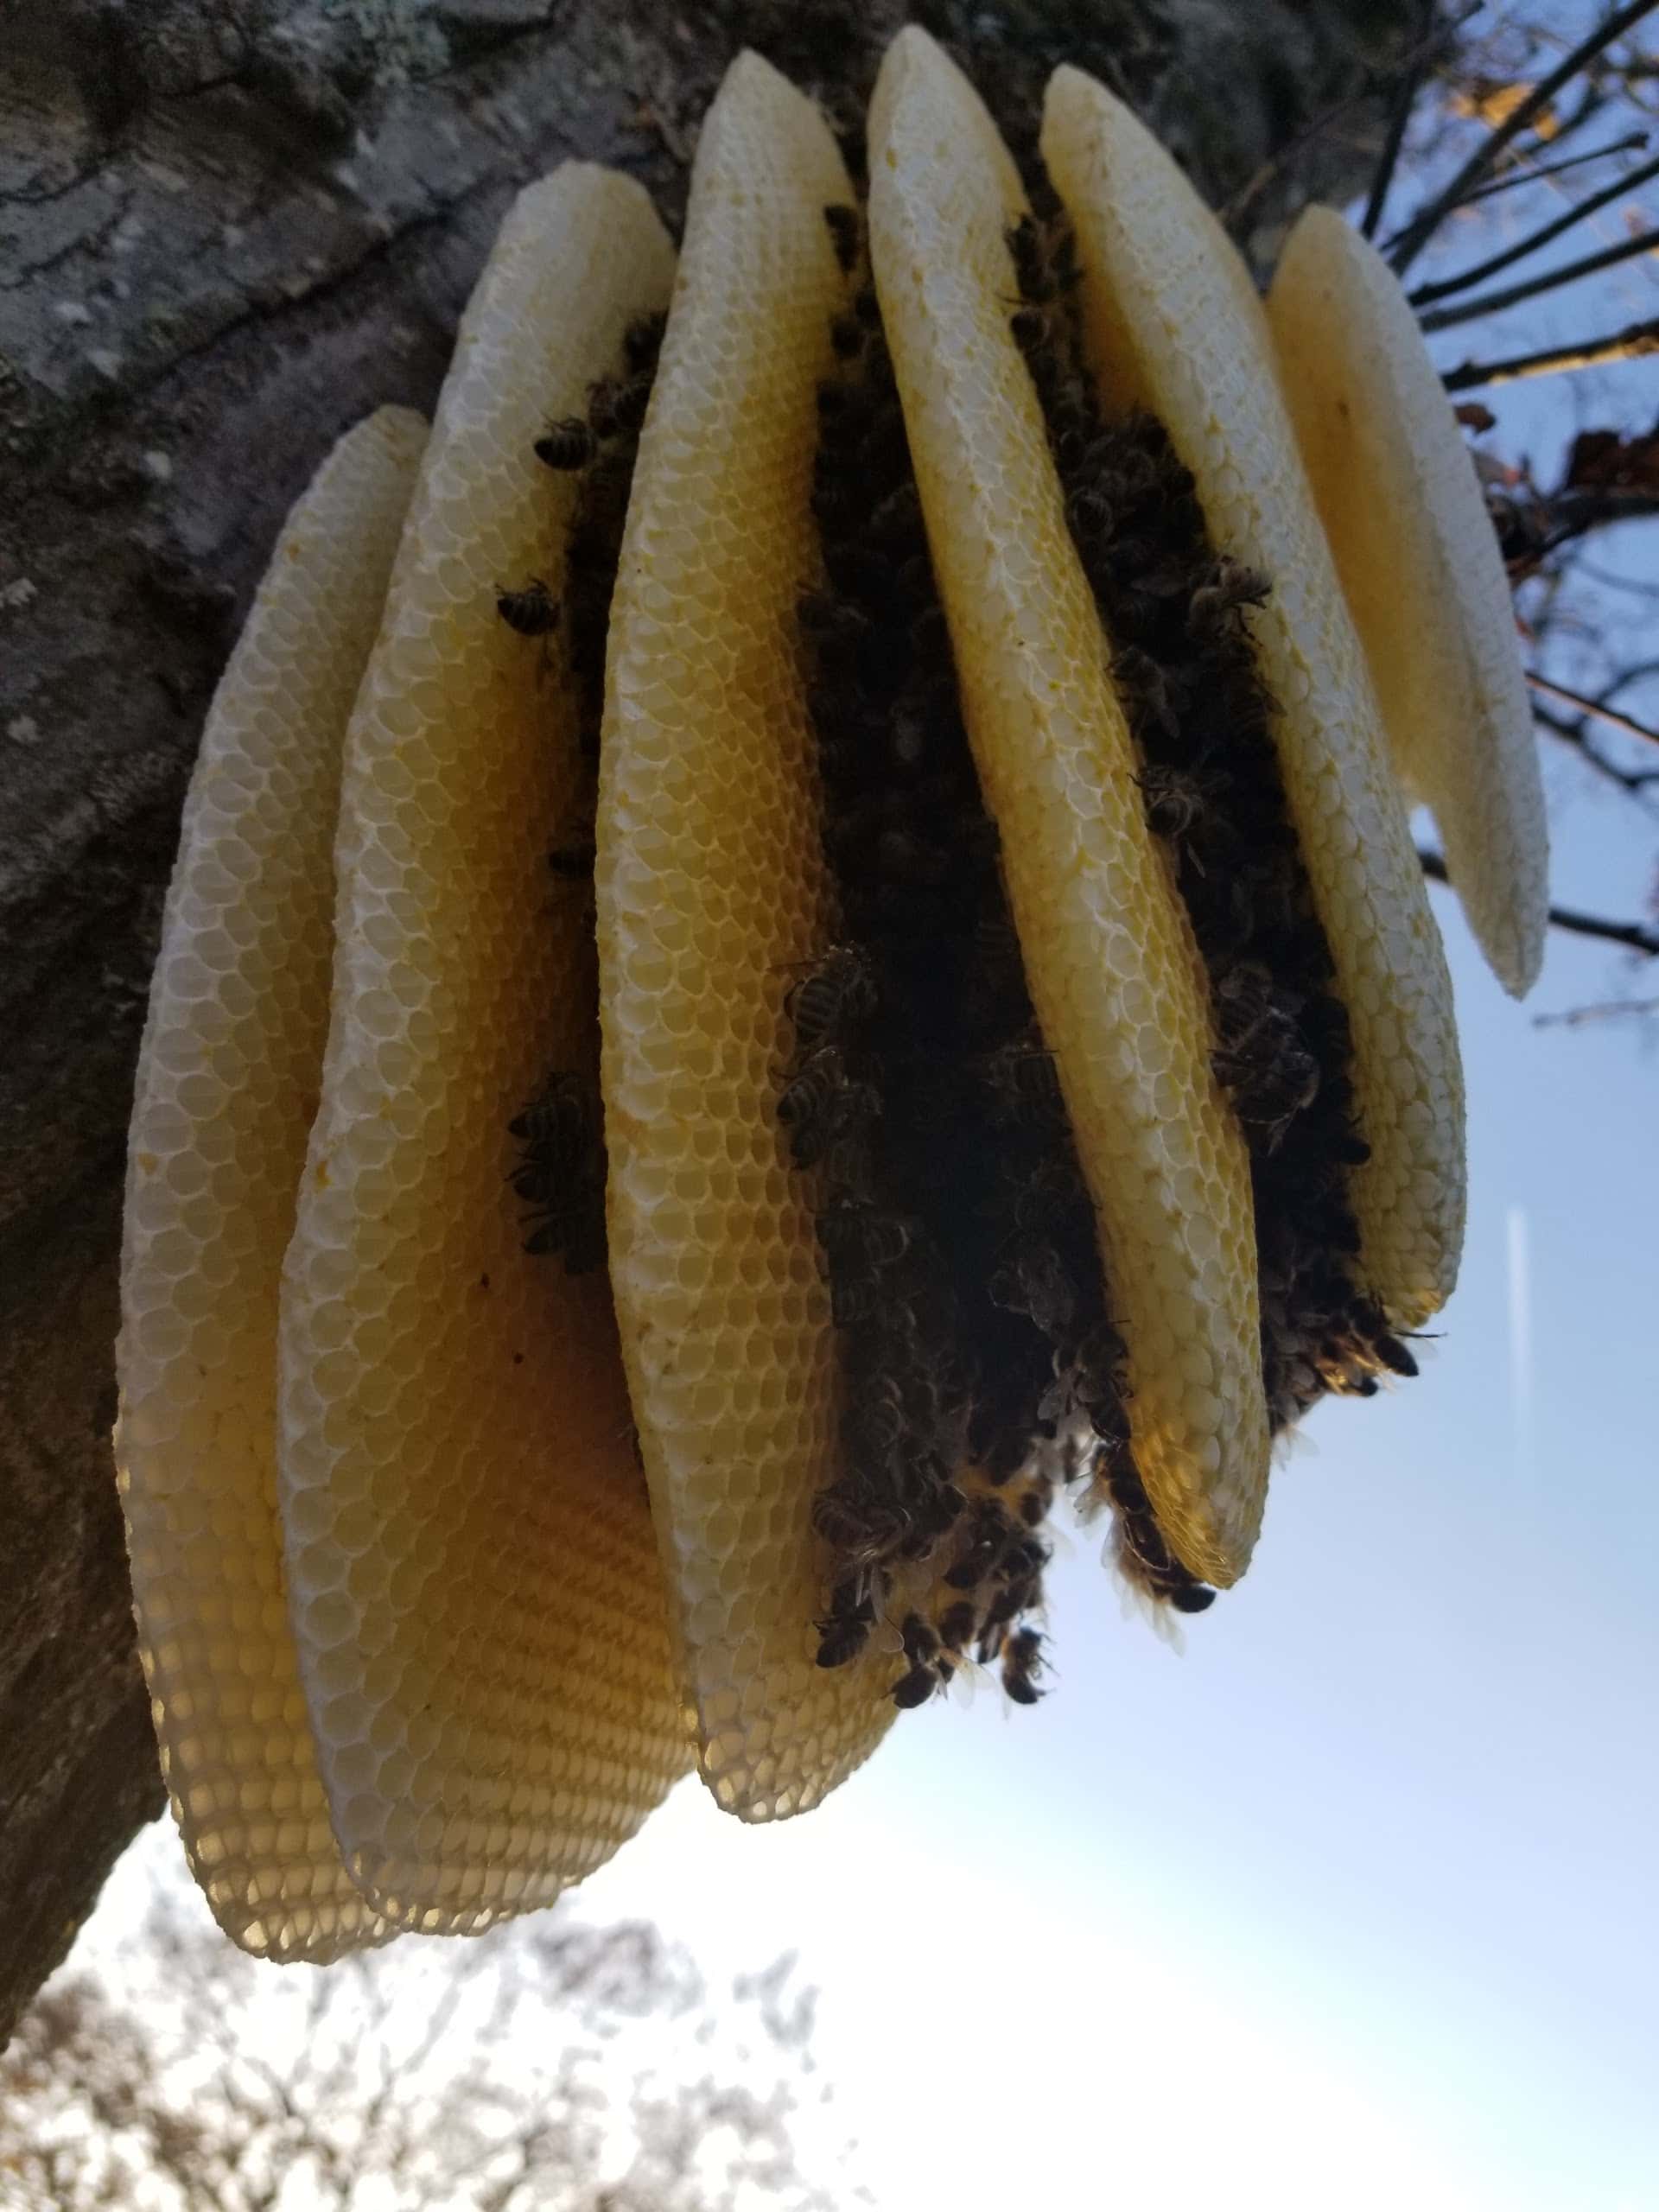 Sawyer’s Wild Mountain Honey - Cropseyville, NY, US, moving a bee hive